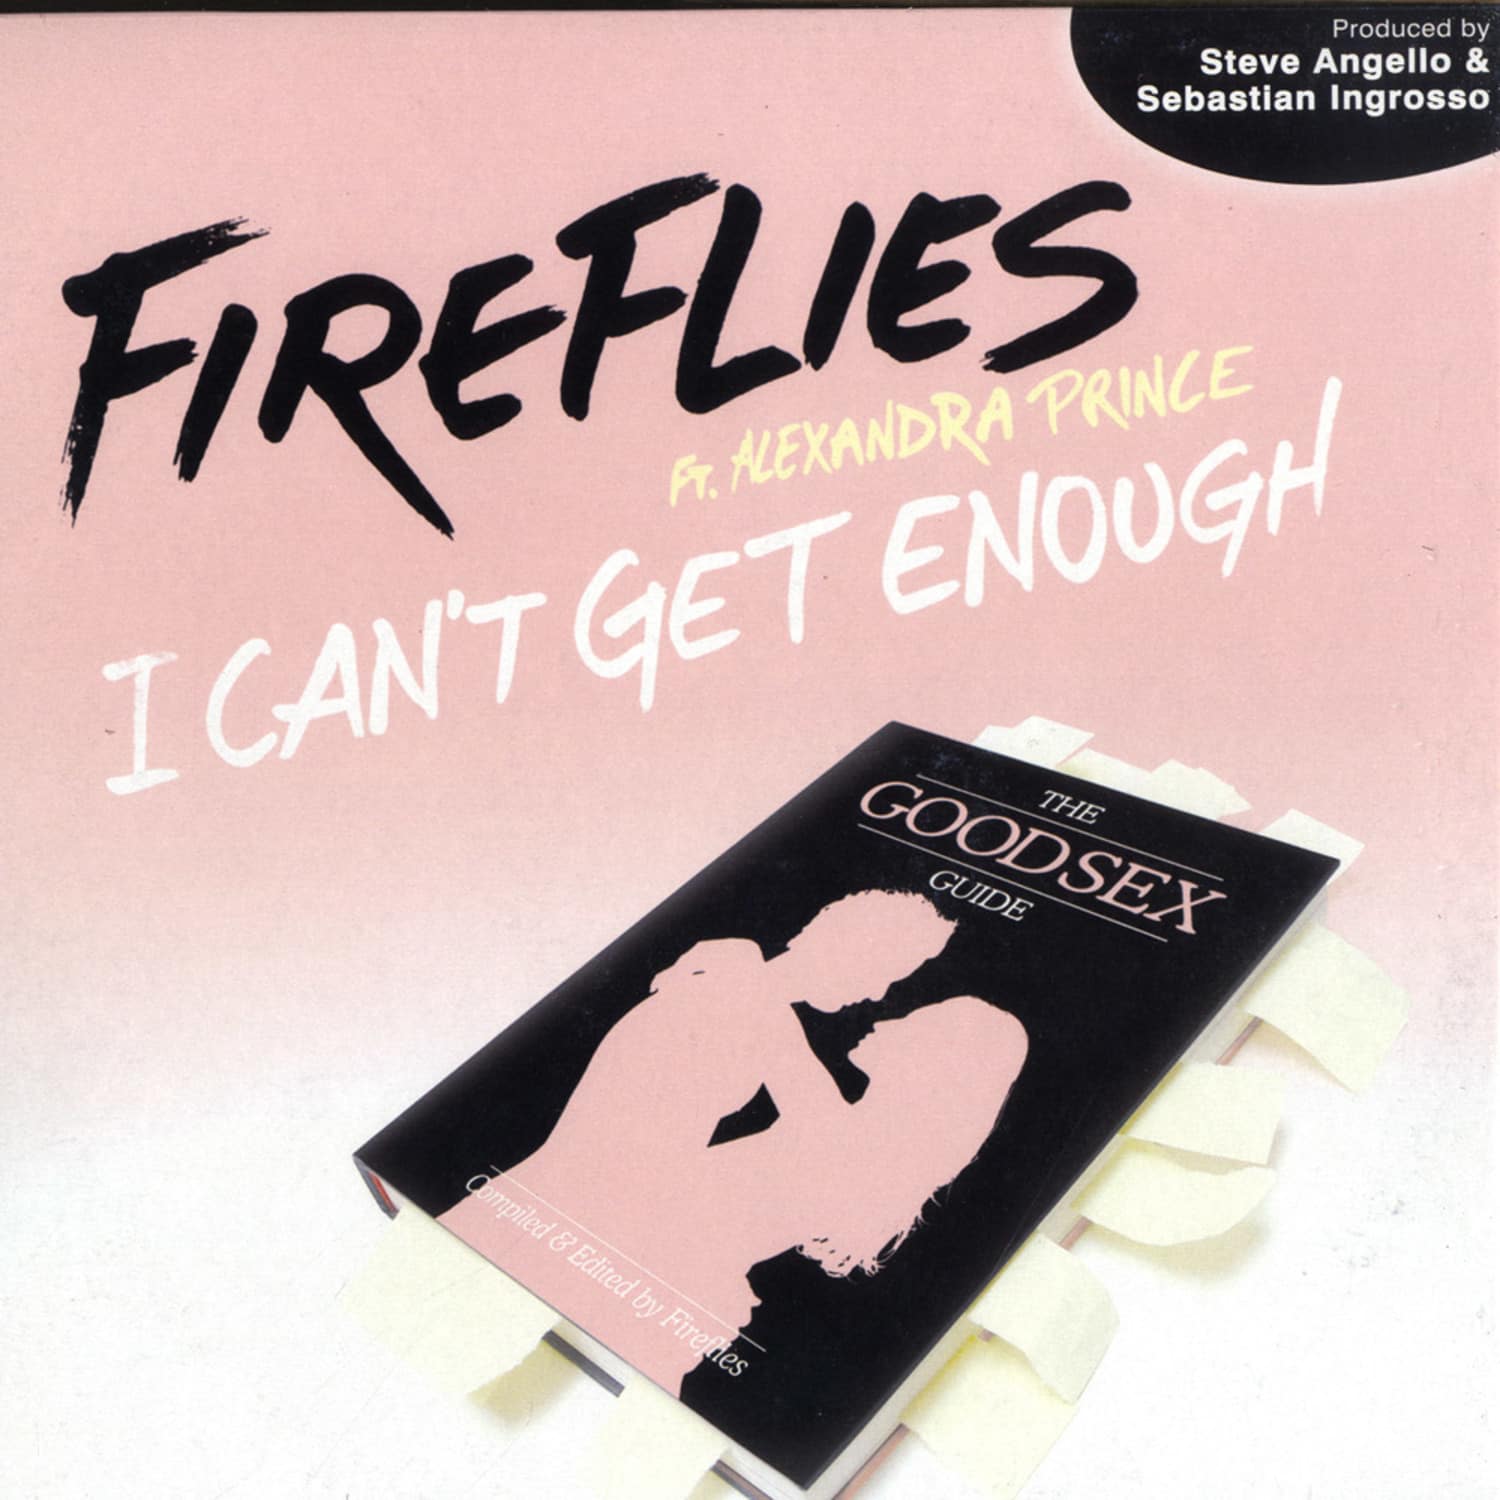 Fireflies - I CANT GET ENOUGH